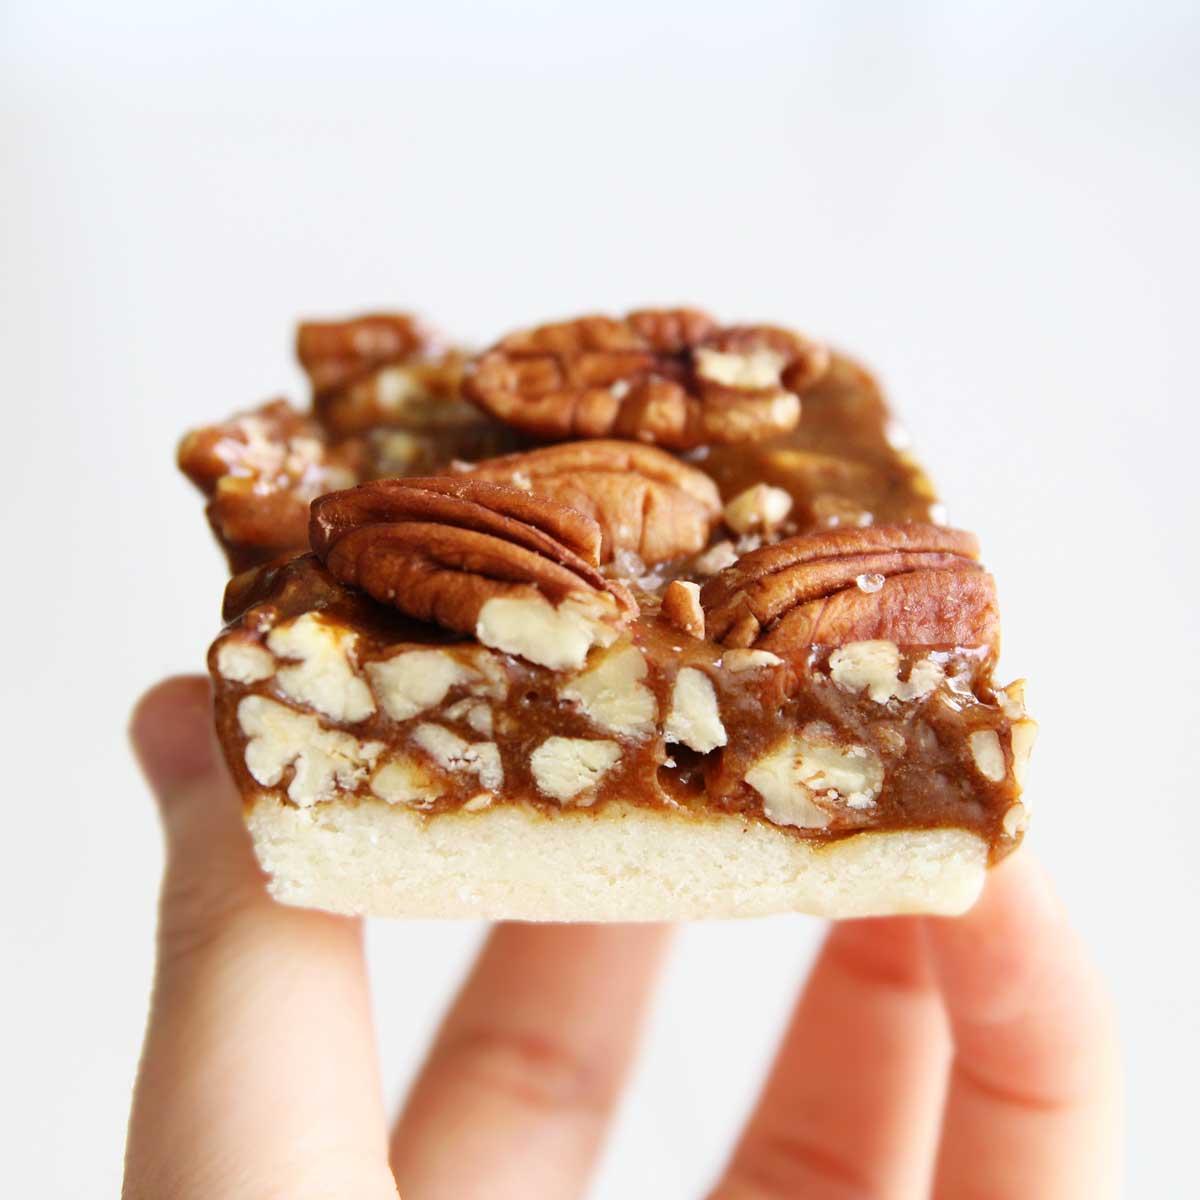 The Best Post-Workout Snack! Almond Butter Chocolate Chip Cookie Dough Collagen Protein Bars - Cookie Dough Collagen Protein Bars